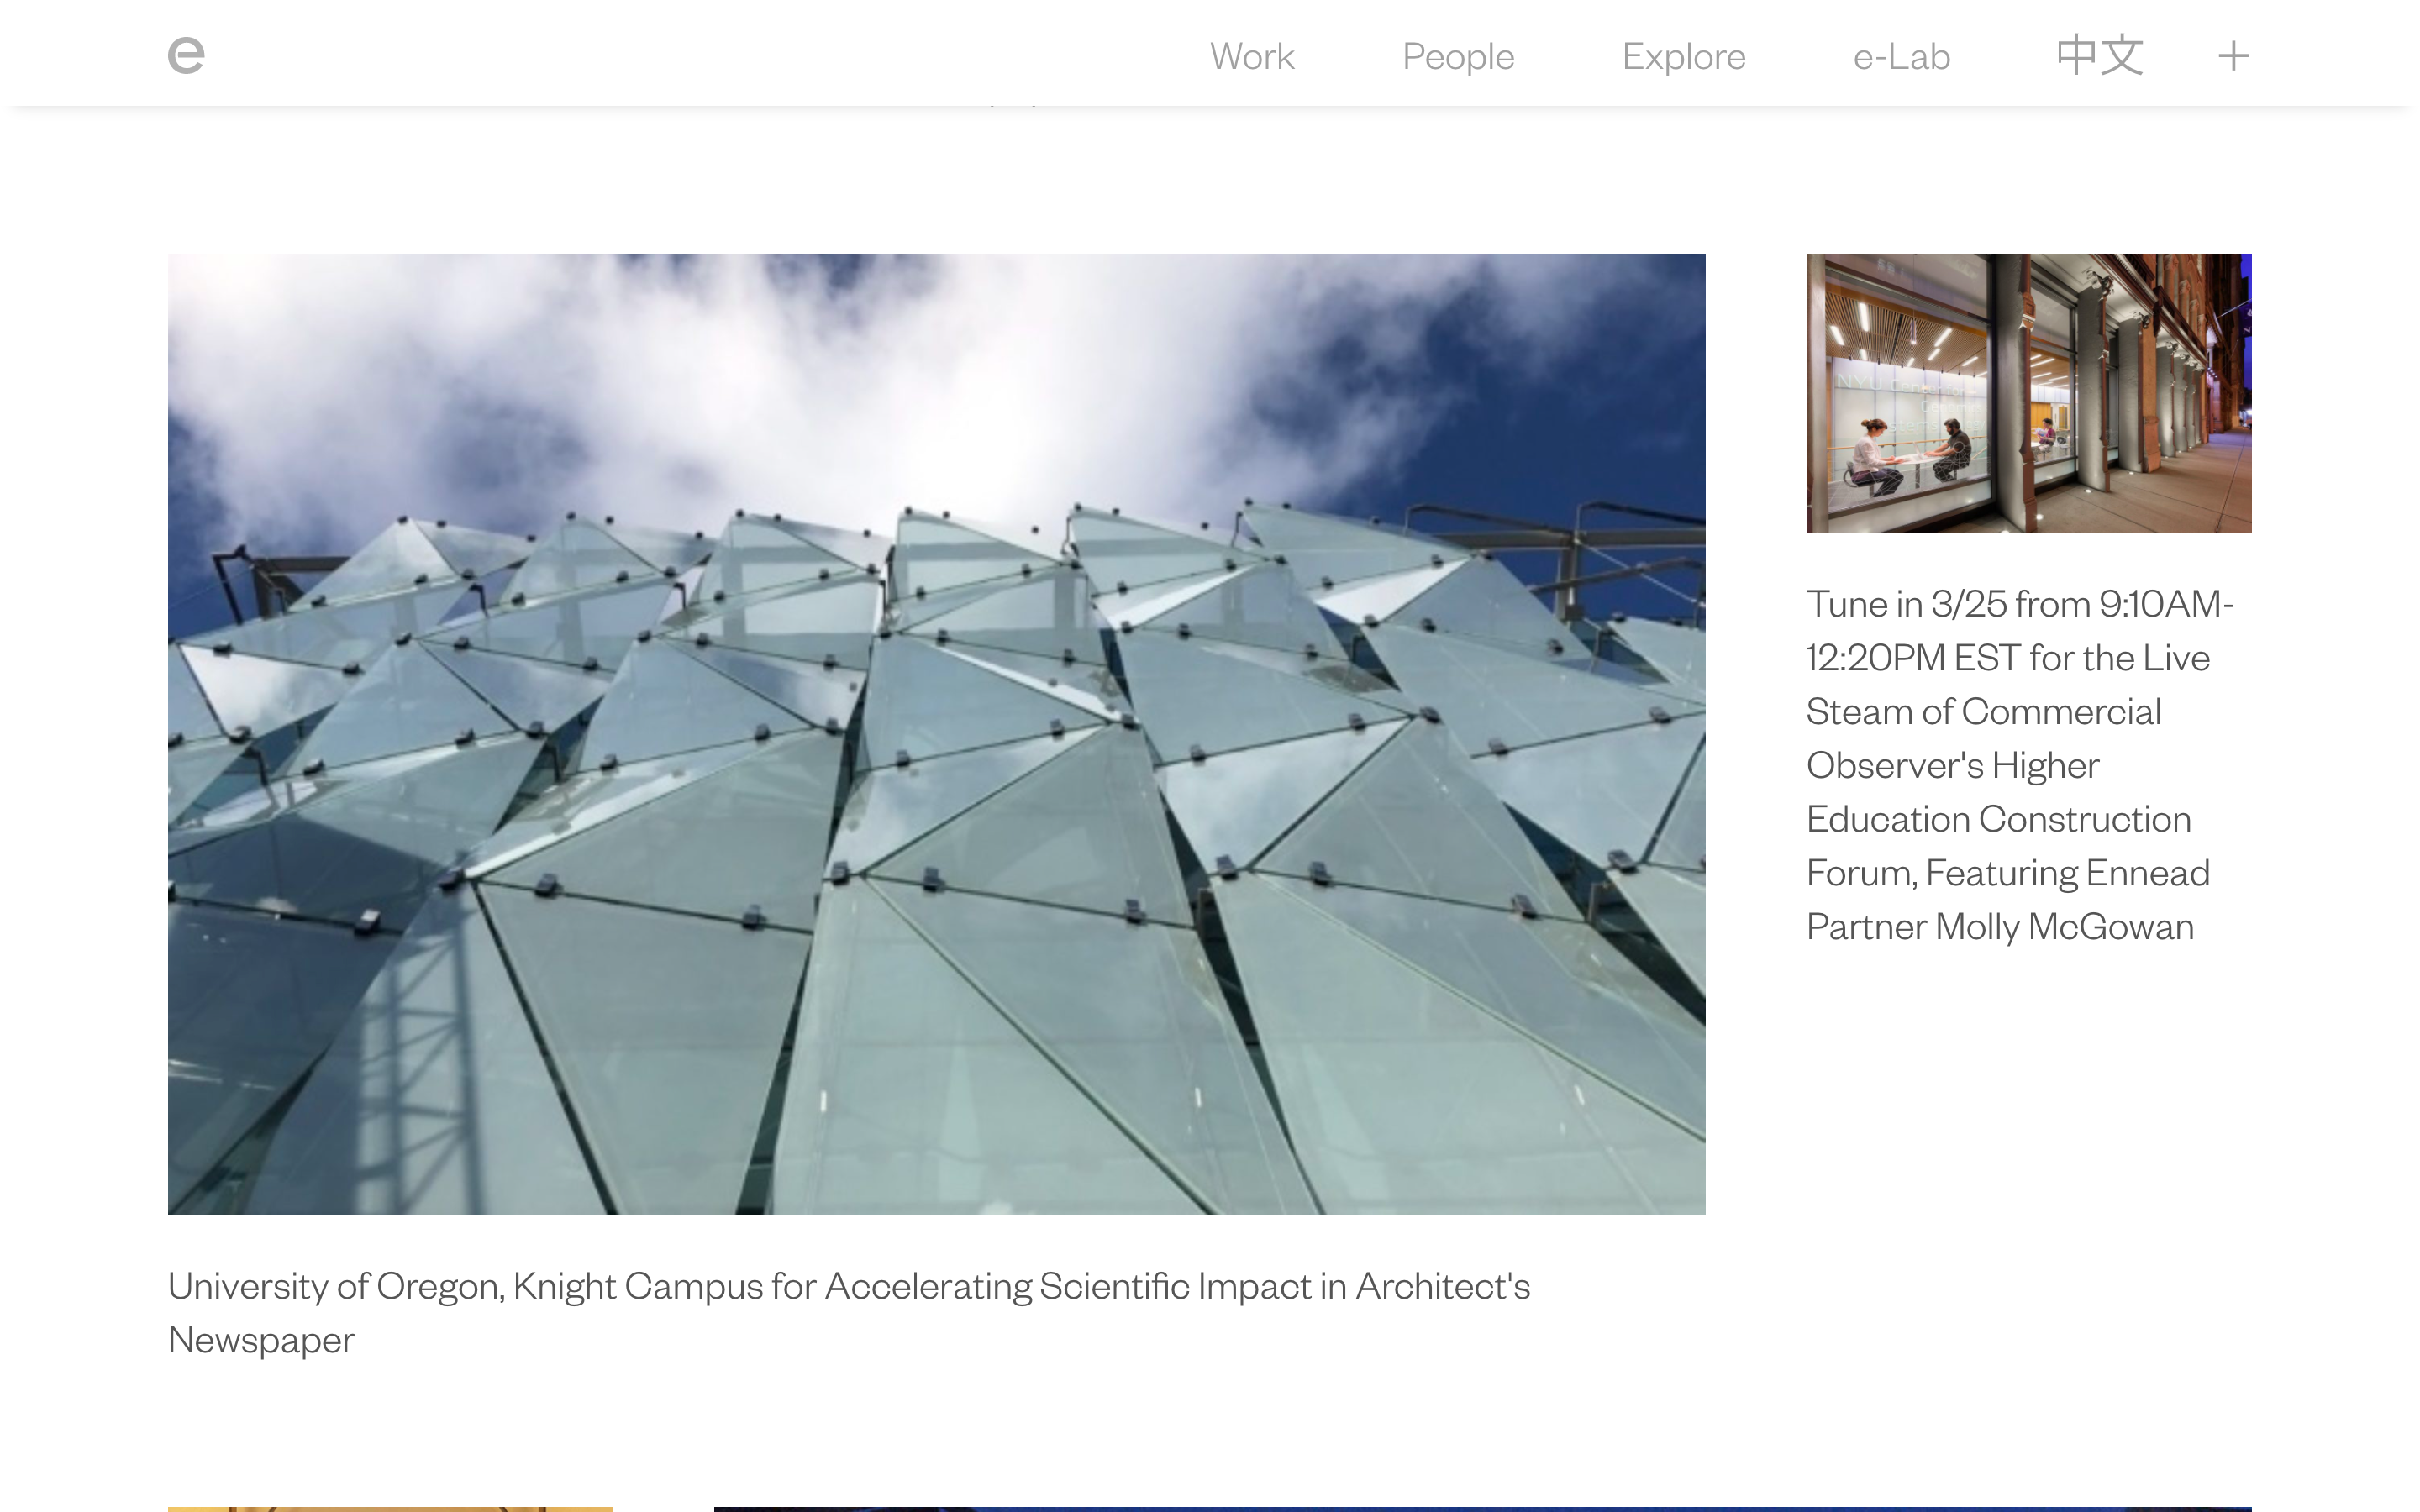 Ennead Architects Website: Knight Campus for Accelerating Scientific Impact